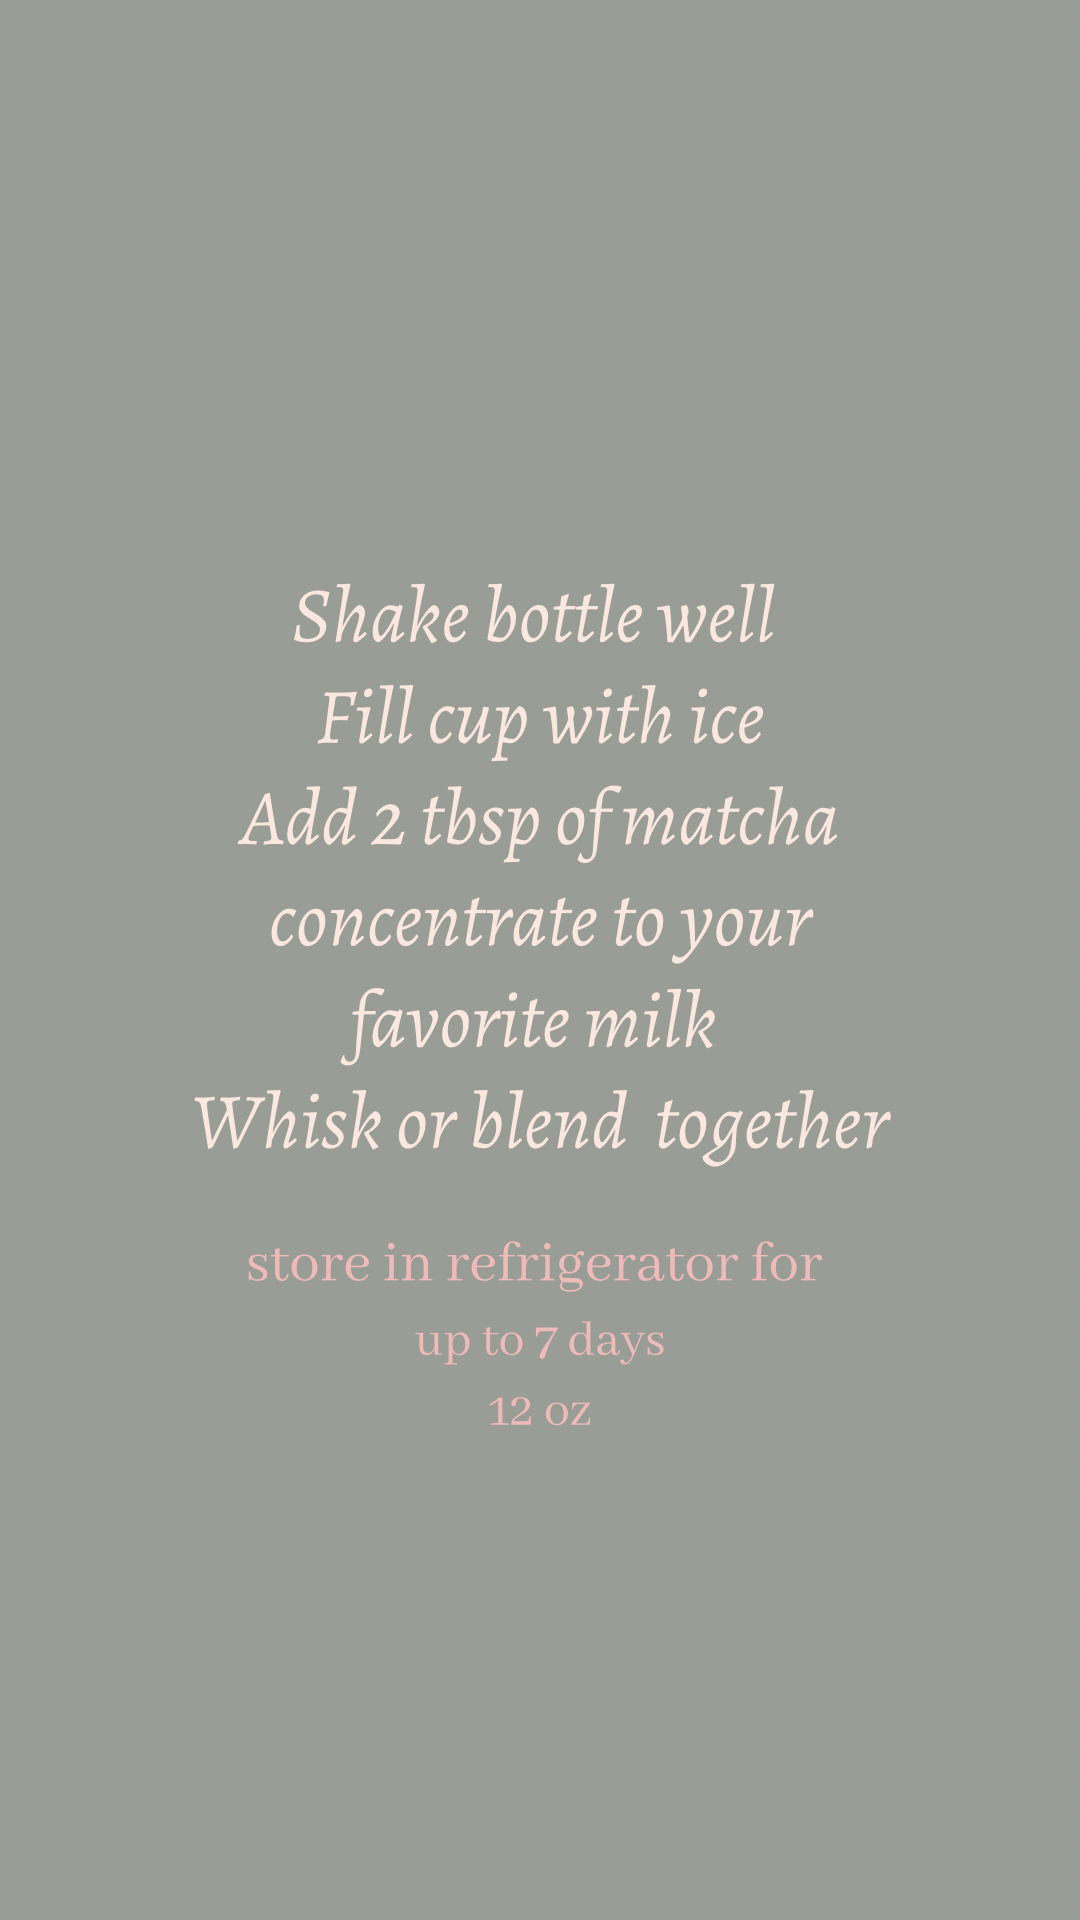 Matcha concentrate Pack of 2 for Delivery